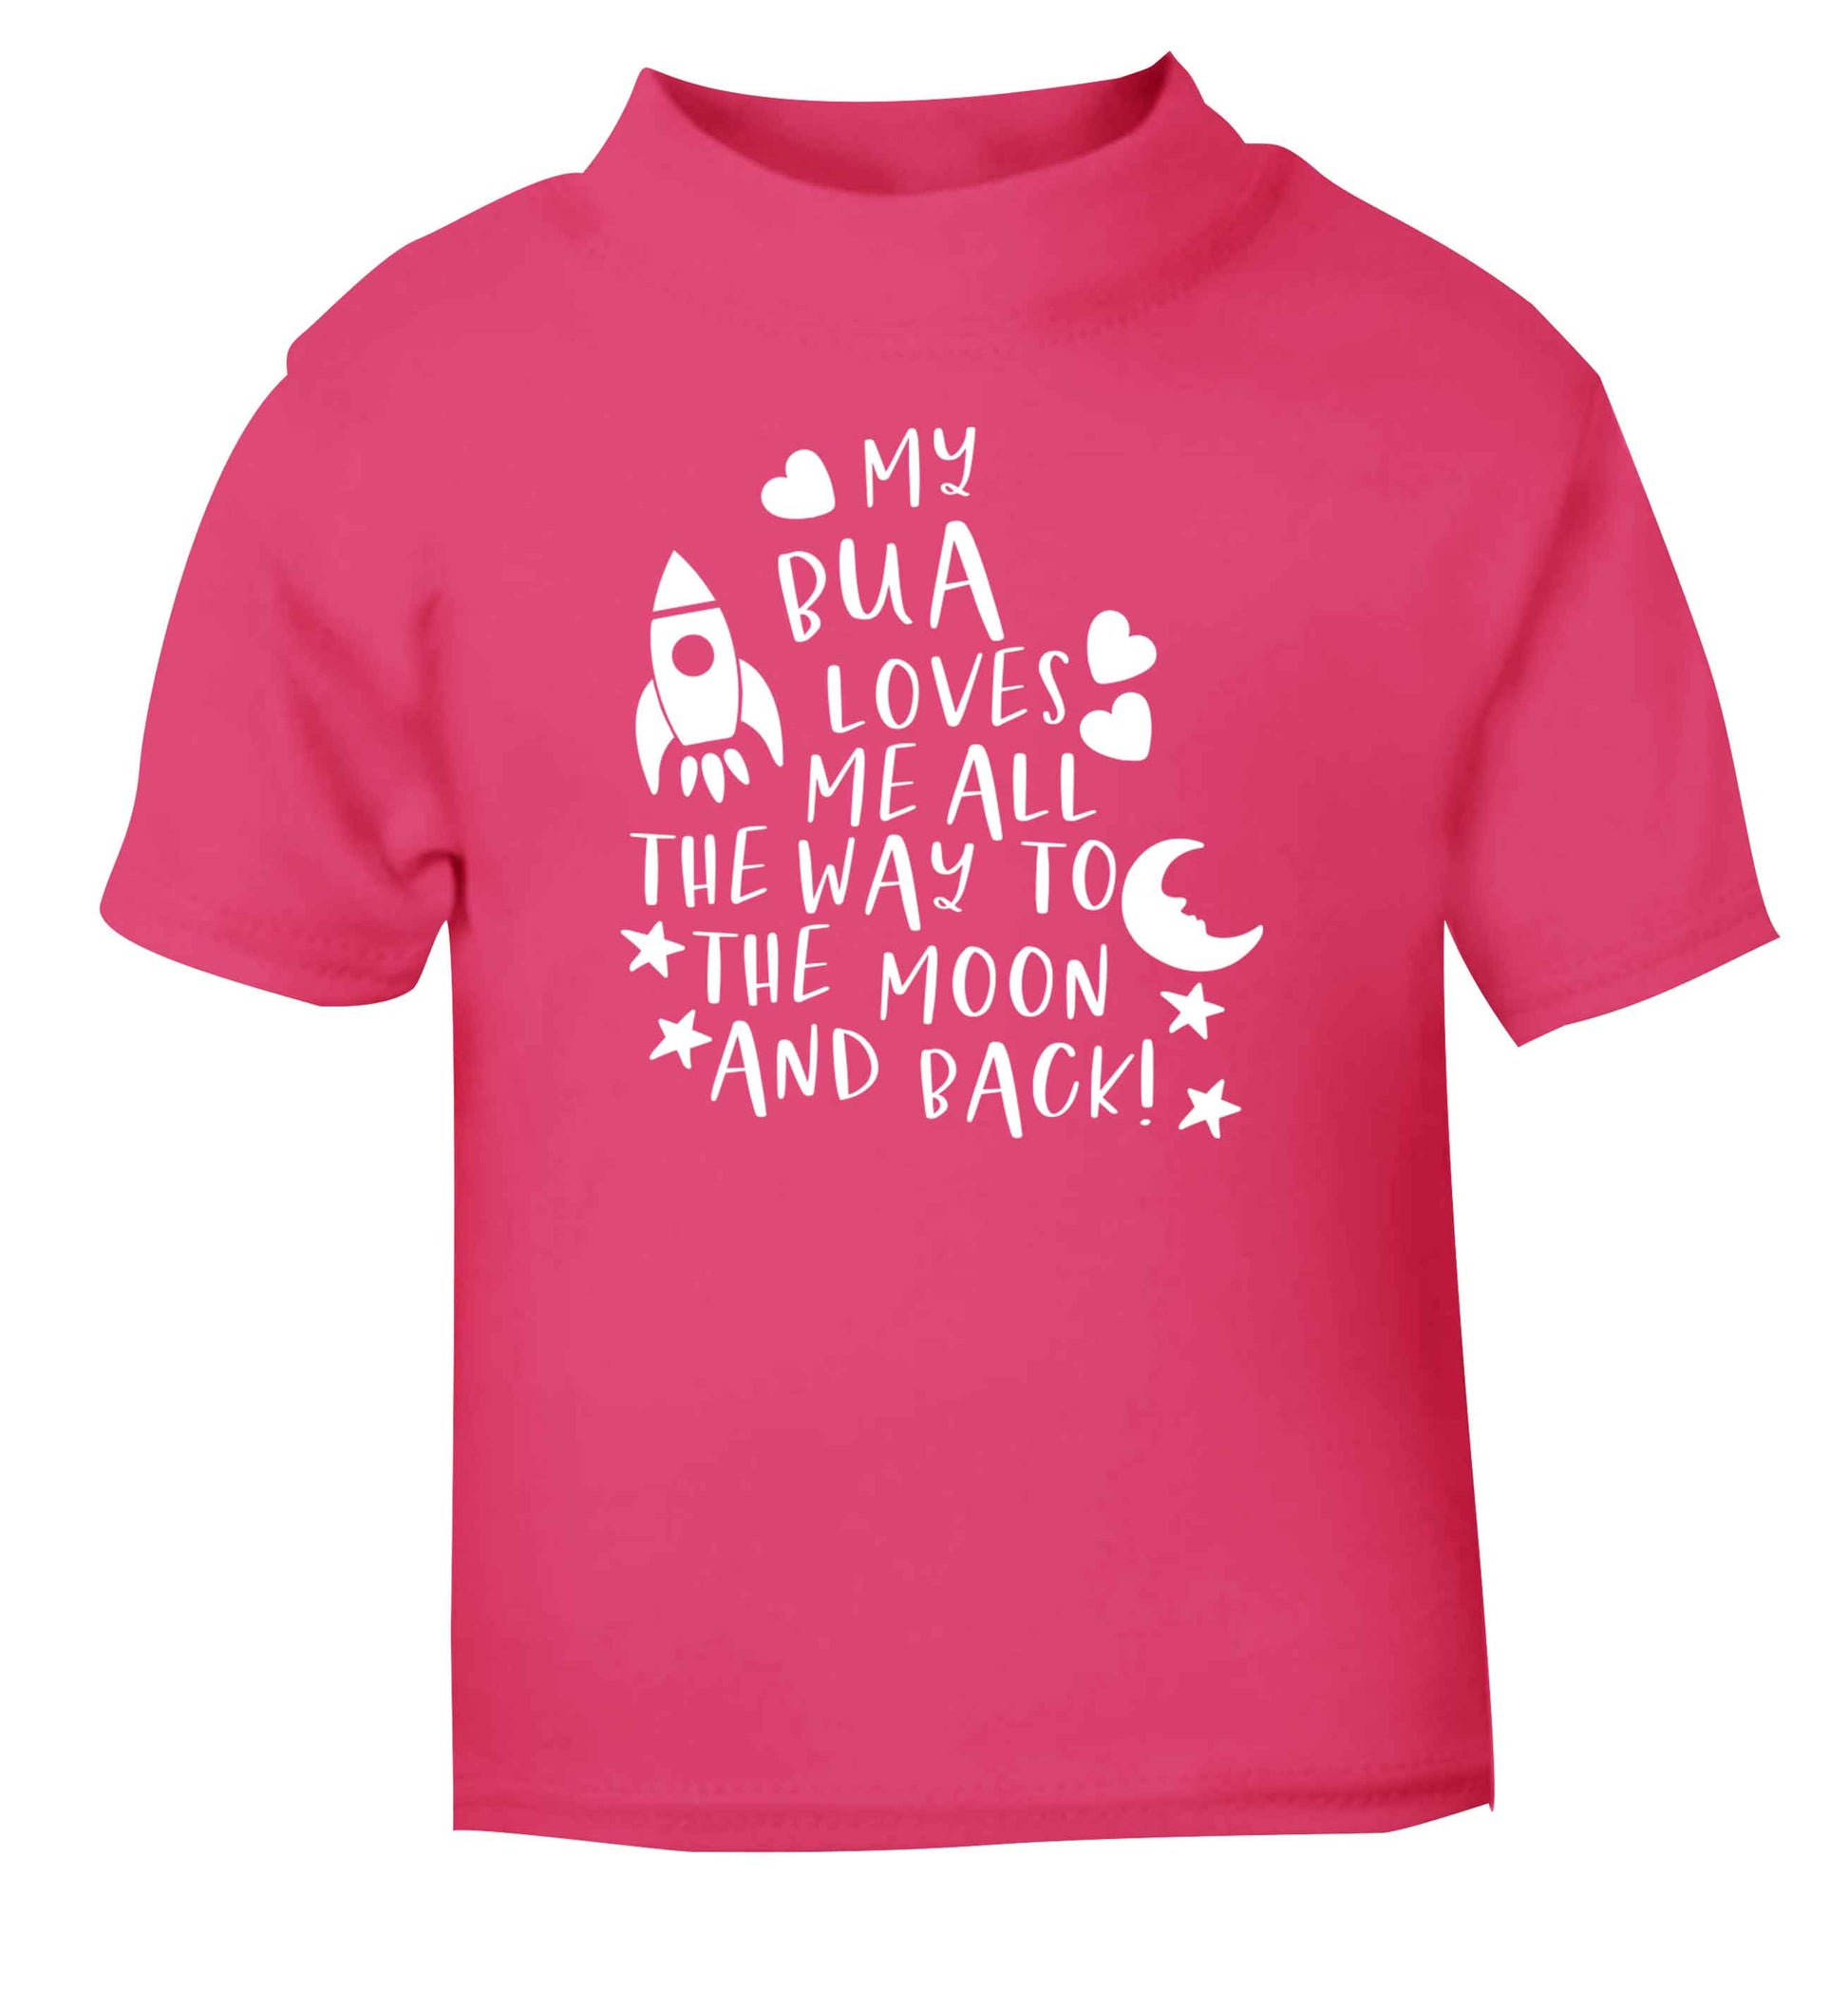 My bua loves me all they way to the moon and back pink Baby Toddler Tshirt 2 Years